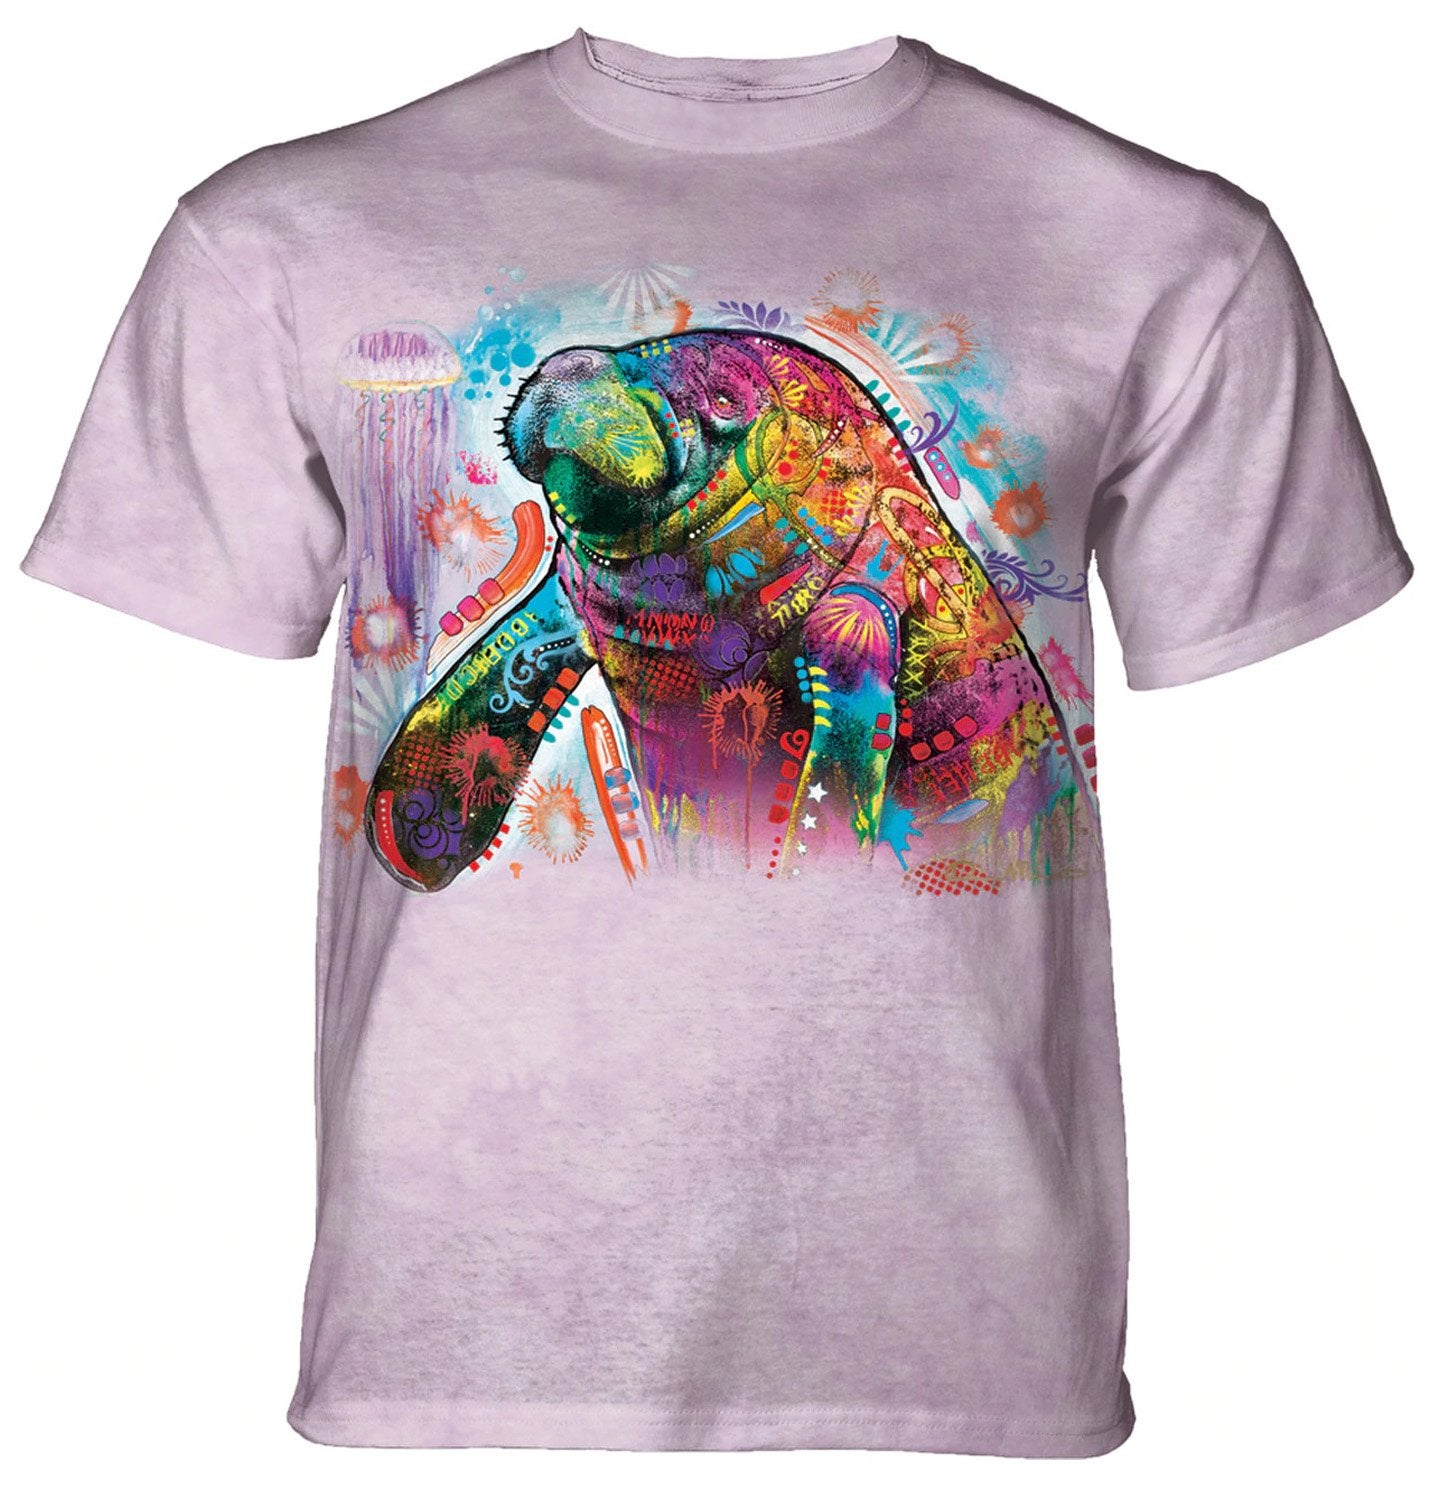 The Mountain - Russo Manatee - Adult Unisex T-Shirt